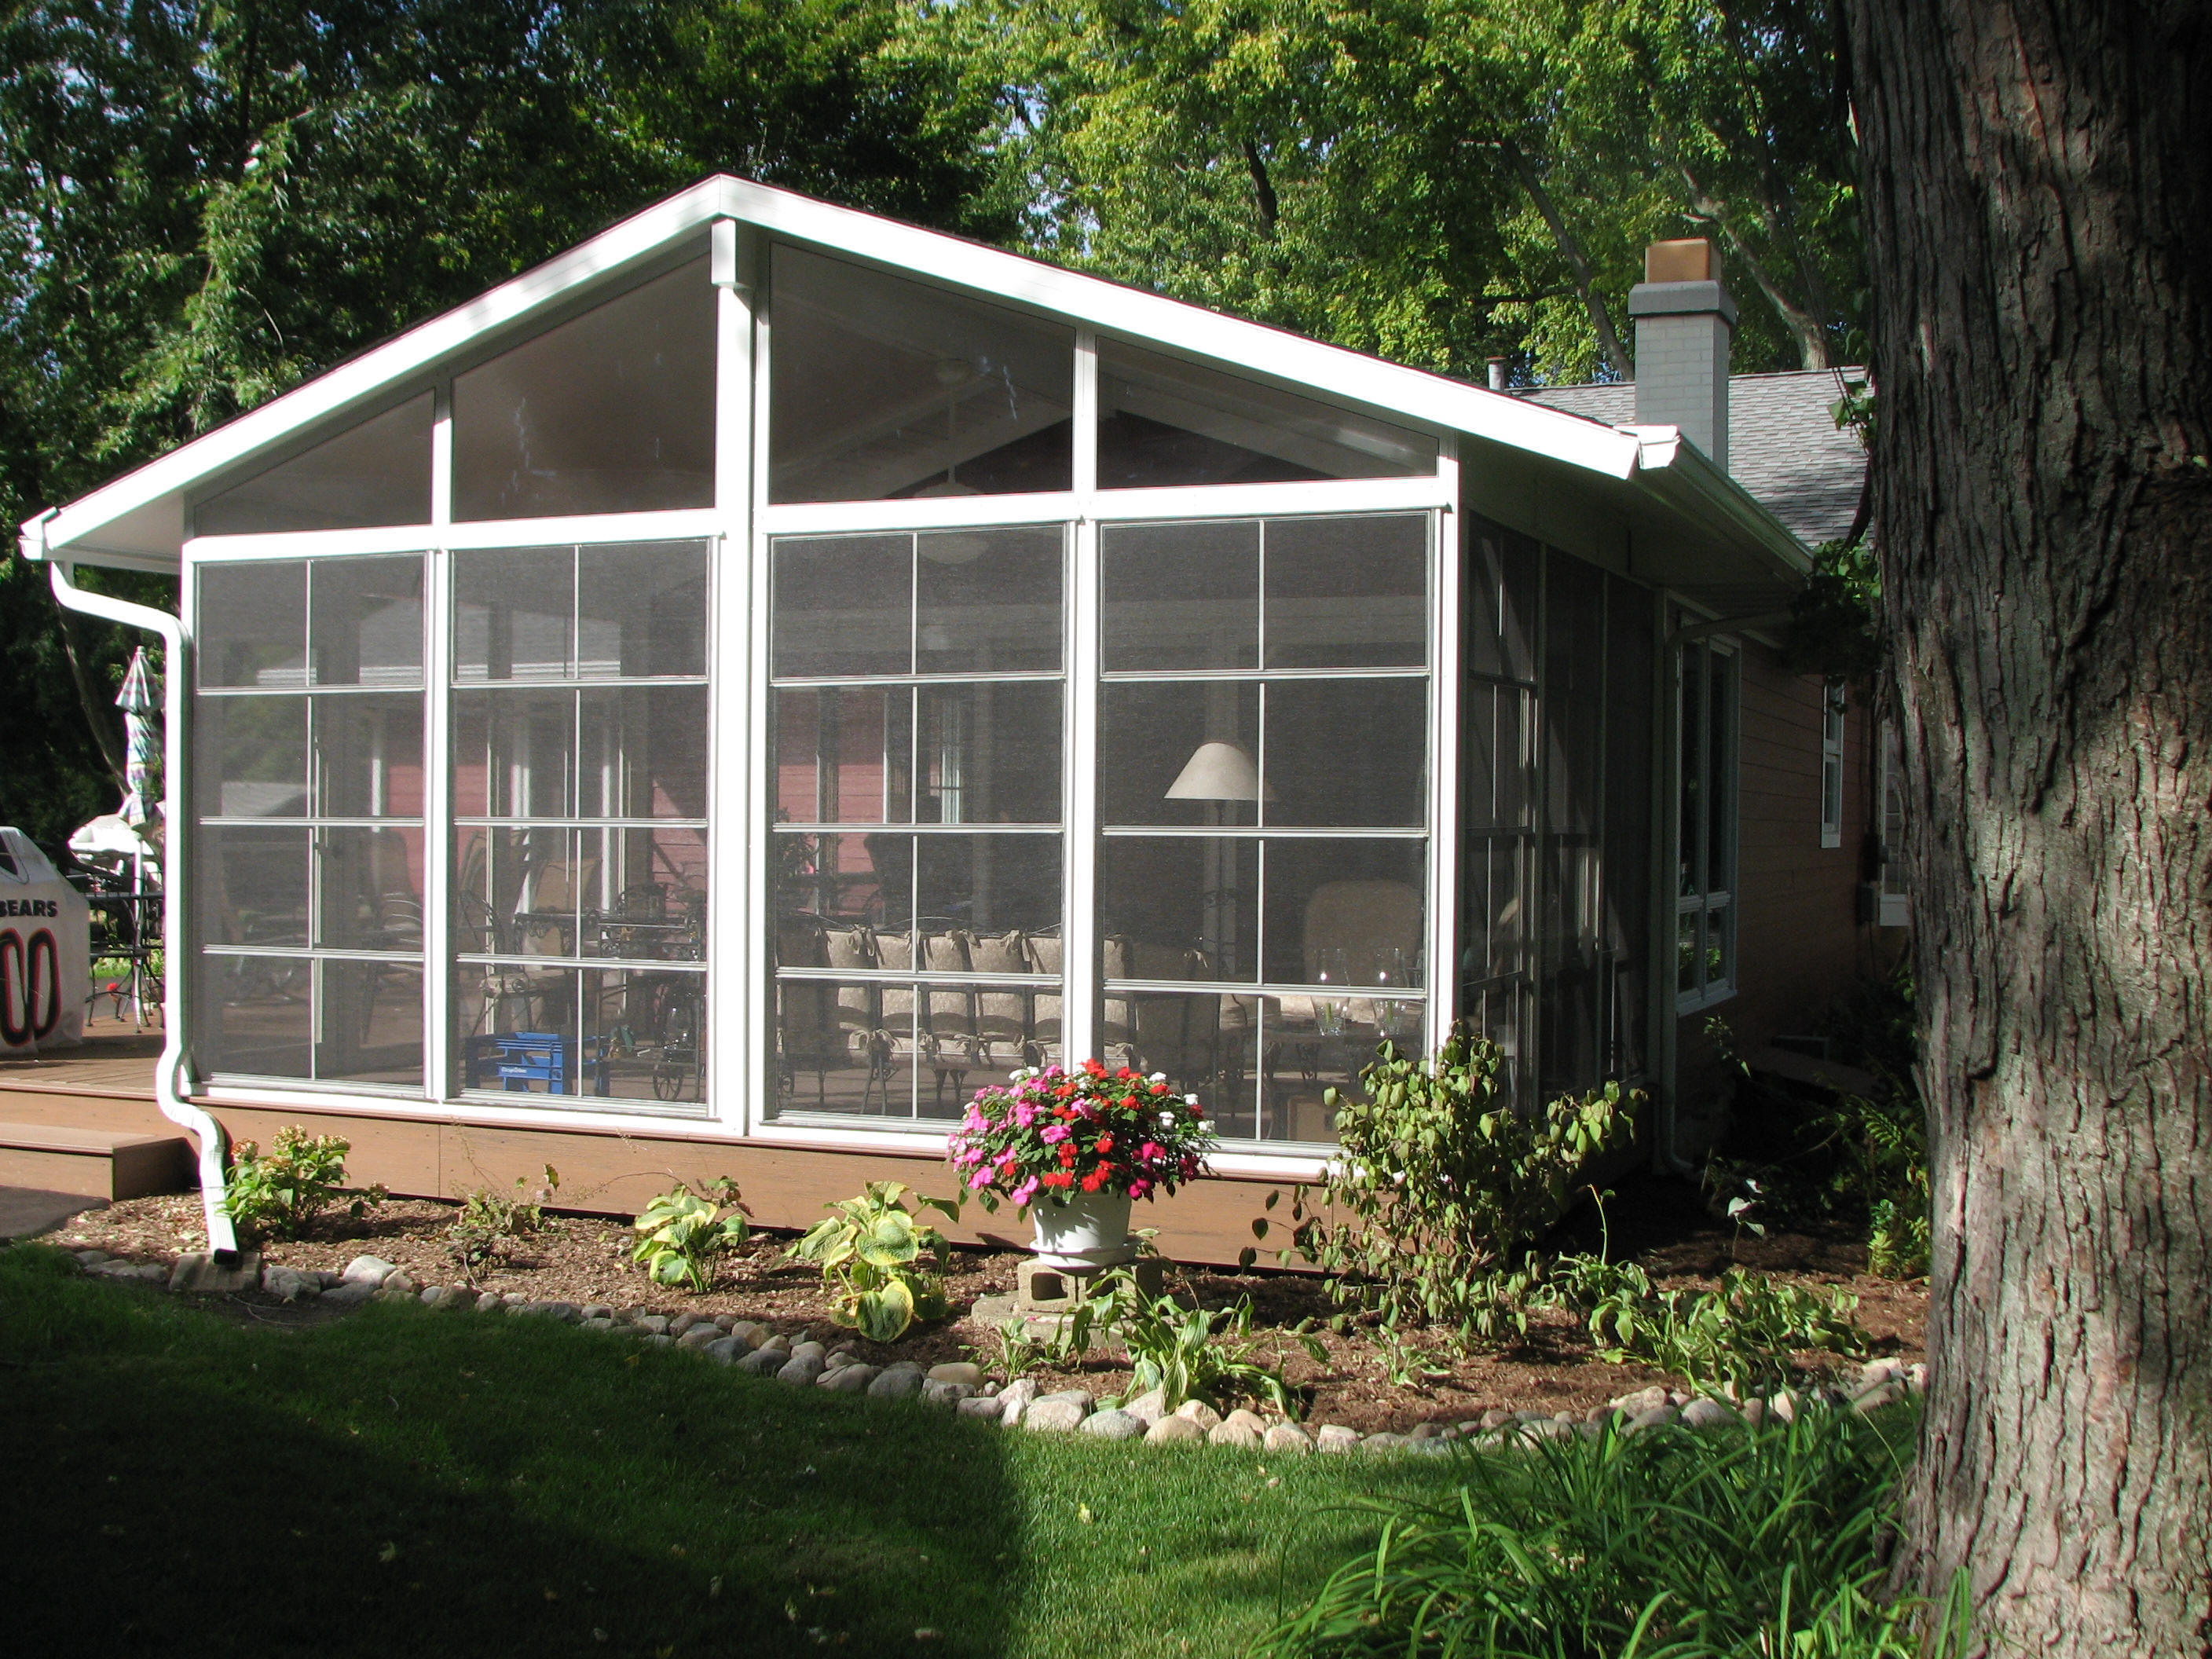 4 Track Stackable Vinyl Windows with trapezoid transoms